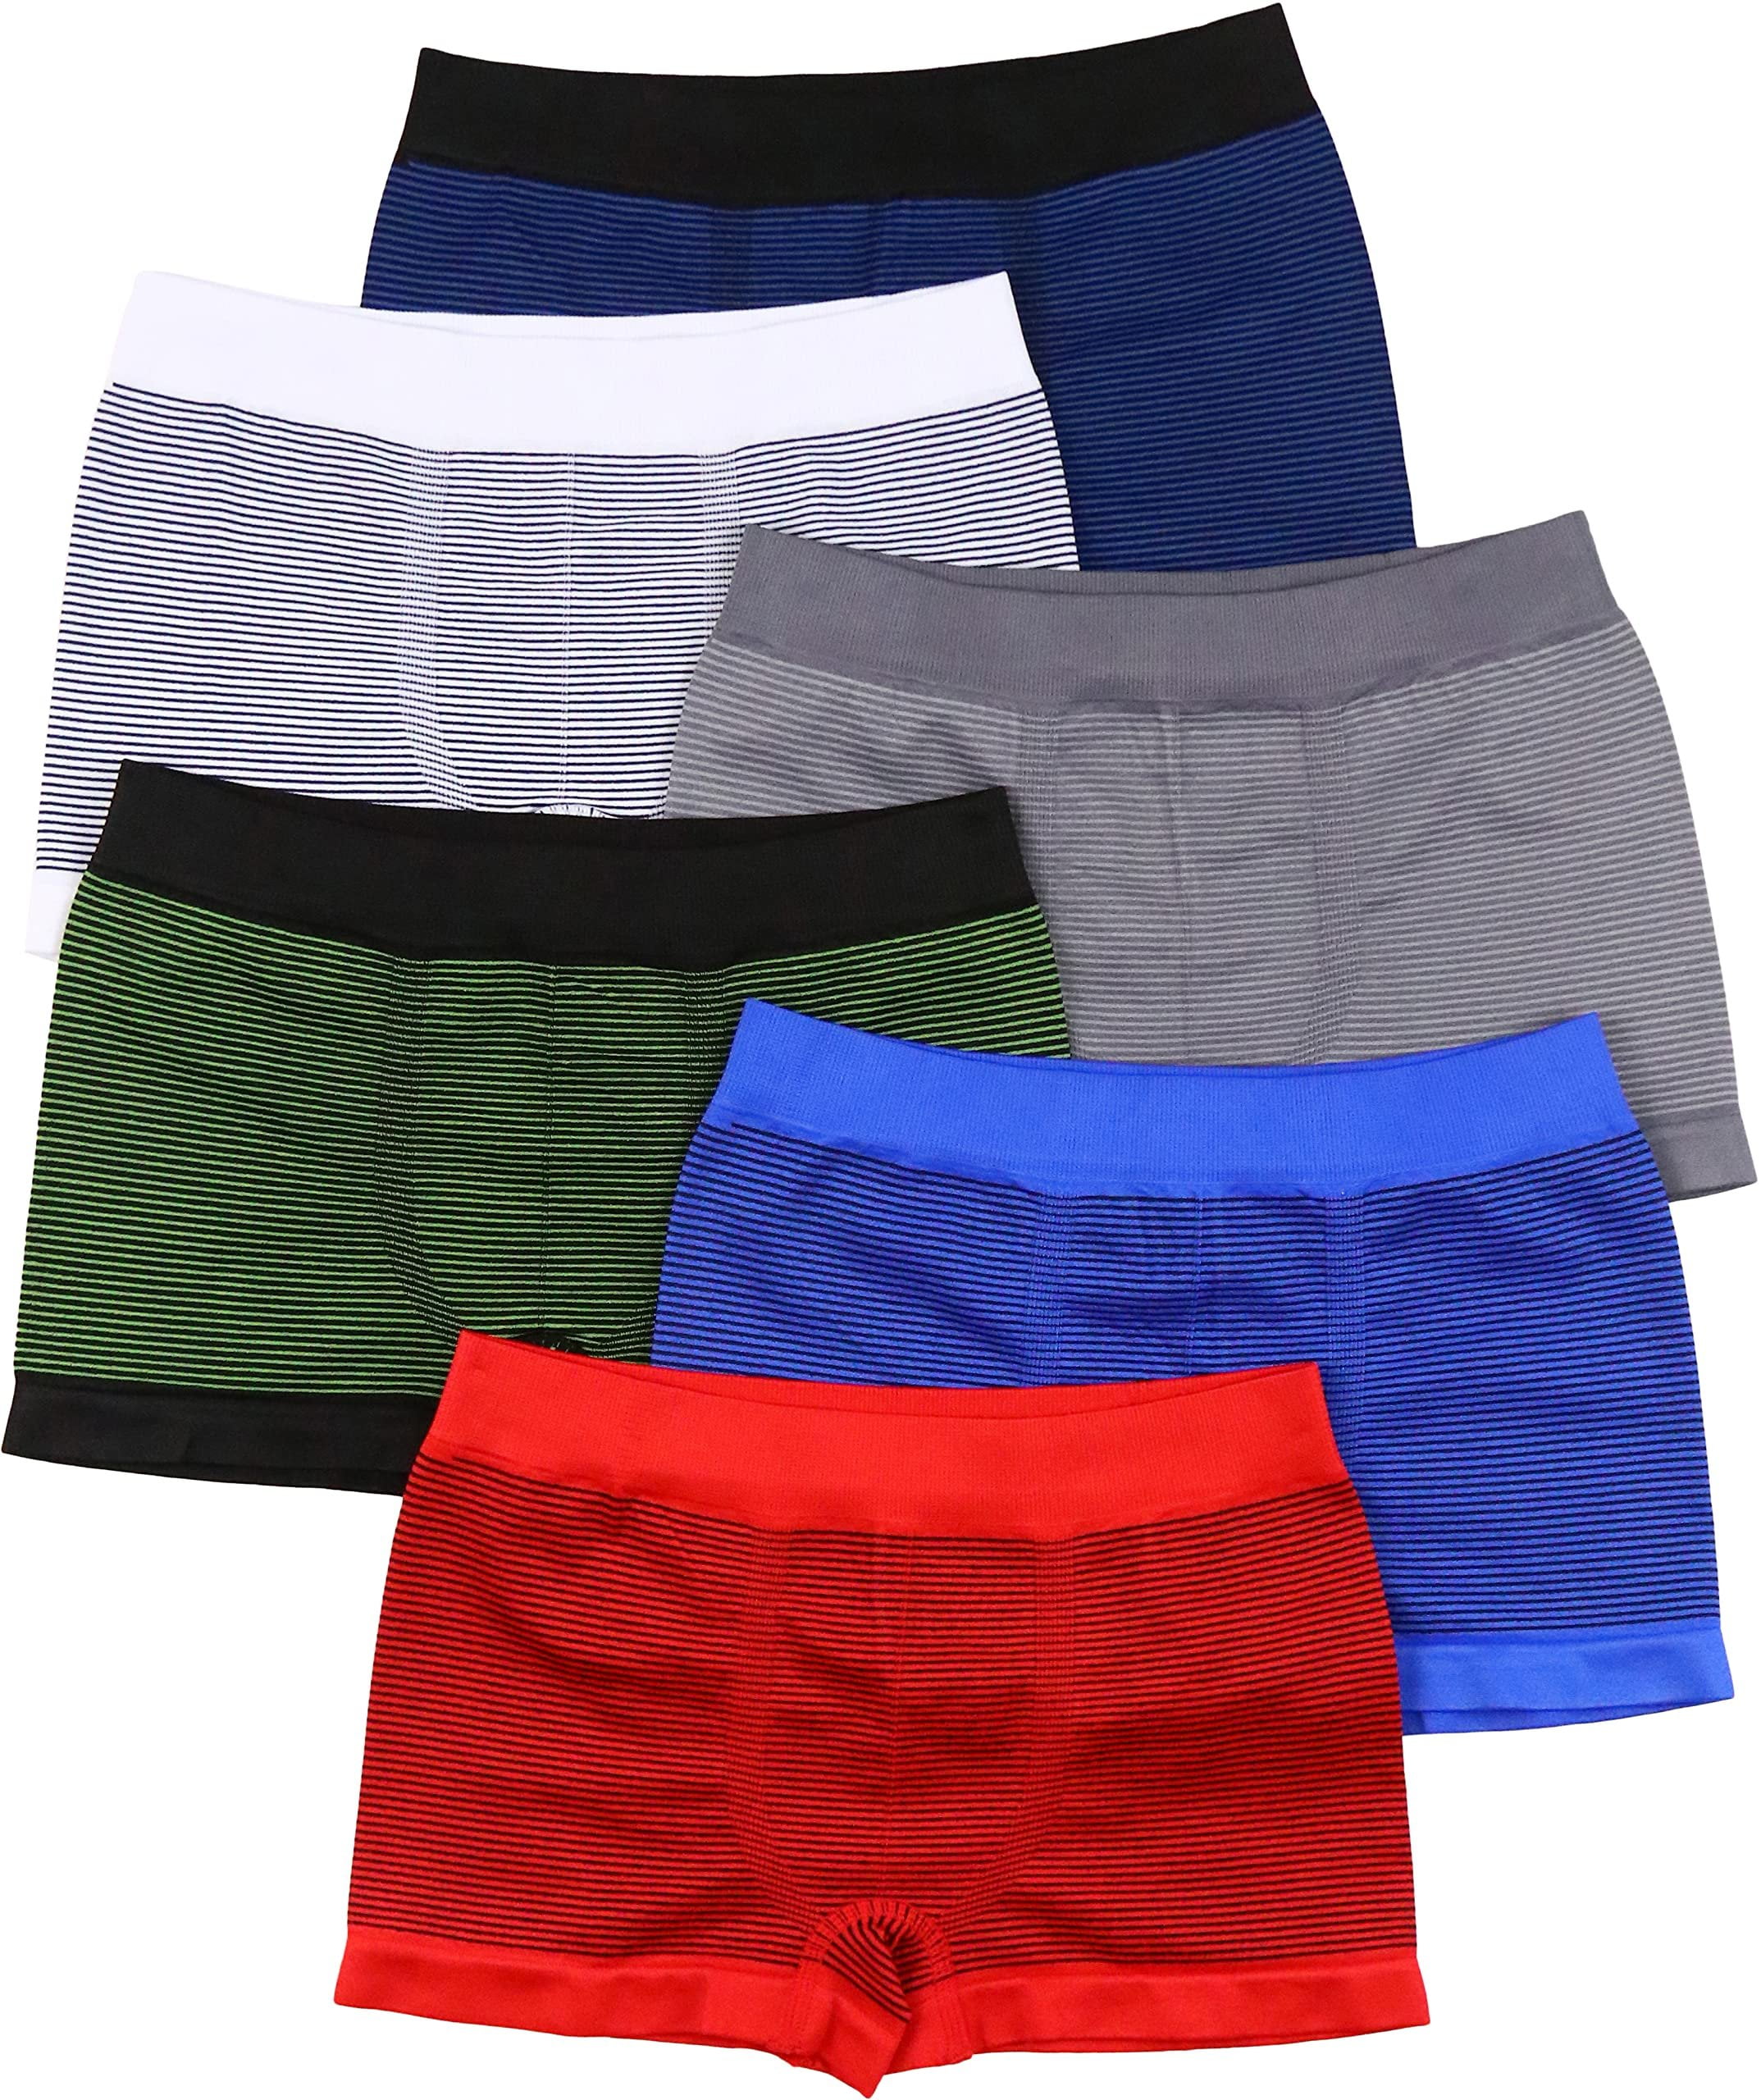 Minecraft Character Boys' Boxer Briefs, 3 Pack 